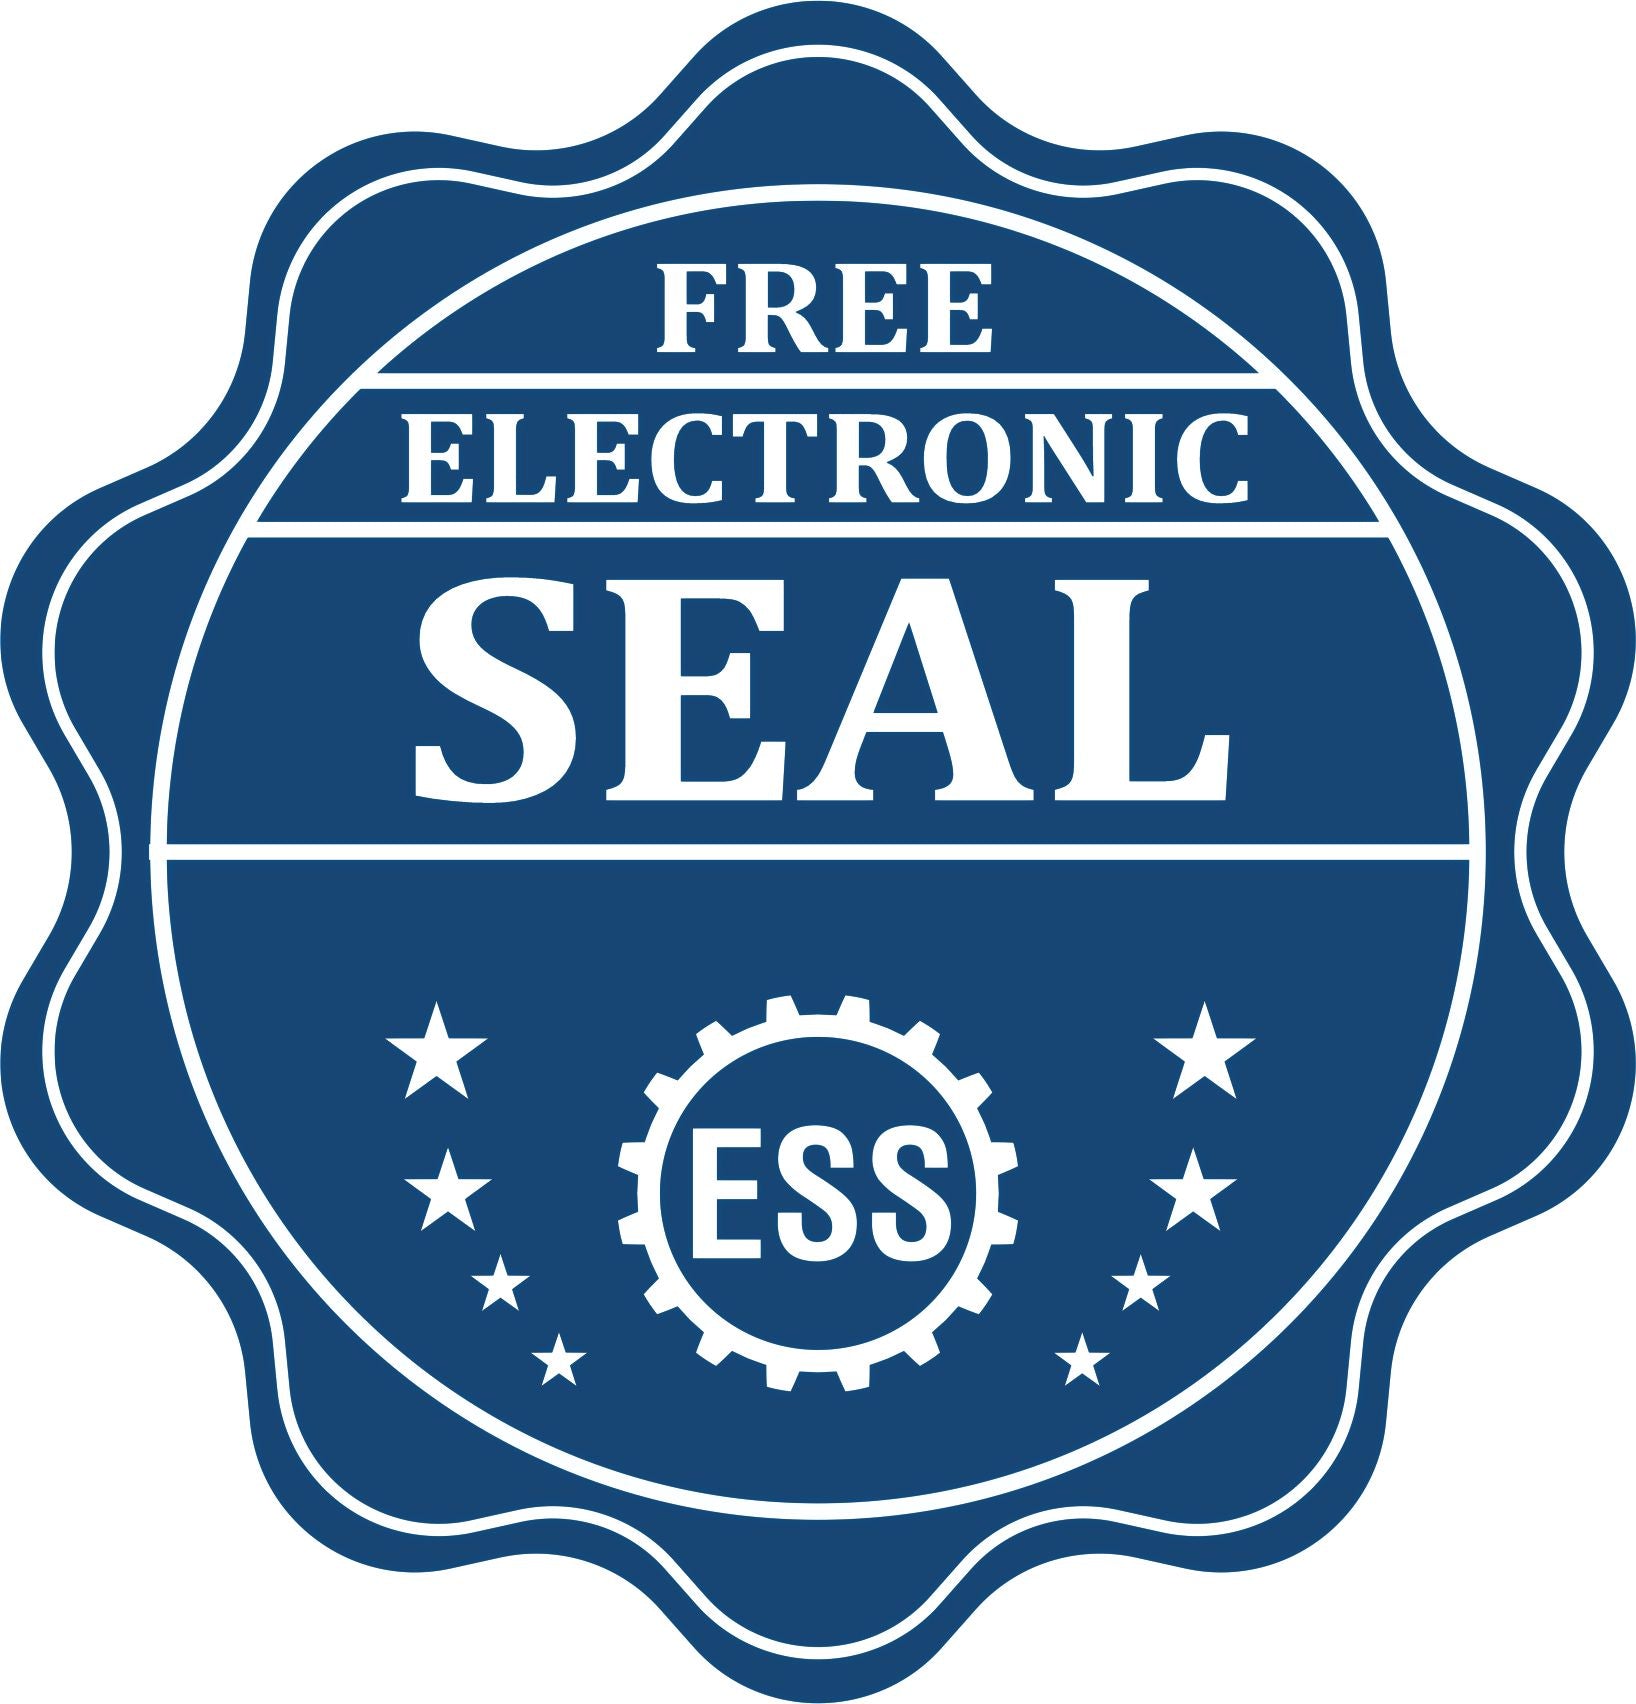 A badge showing a free electronic seal for the Hybrid Mississippi Geologist Seal with stars and the ESS gear on the emblem.